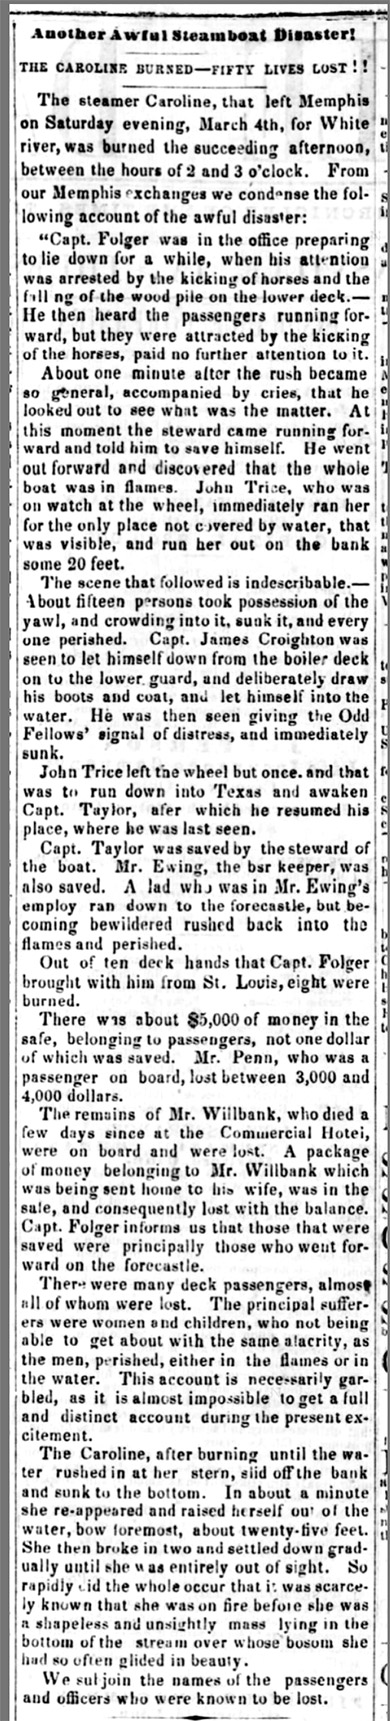 "Another Awful Steamboat Disaster!" newspaper clipping